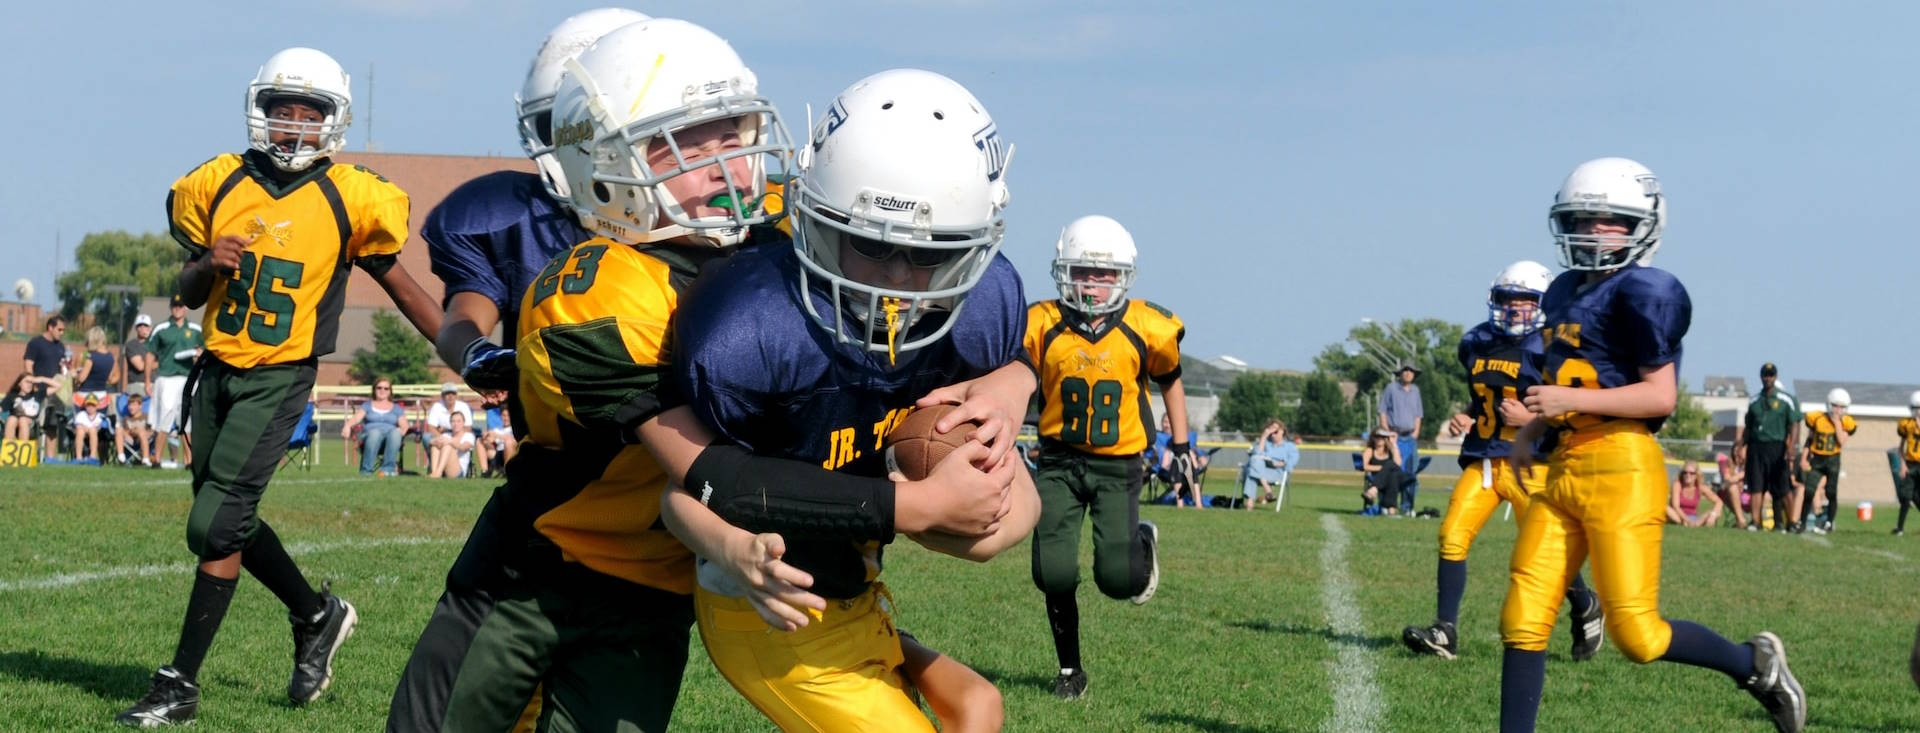 Children playing tackle football and being exposed to concussions.